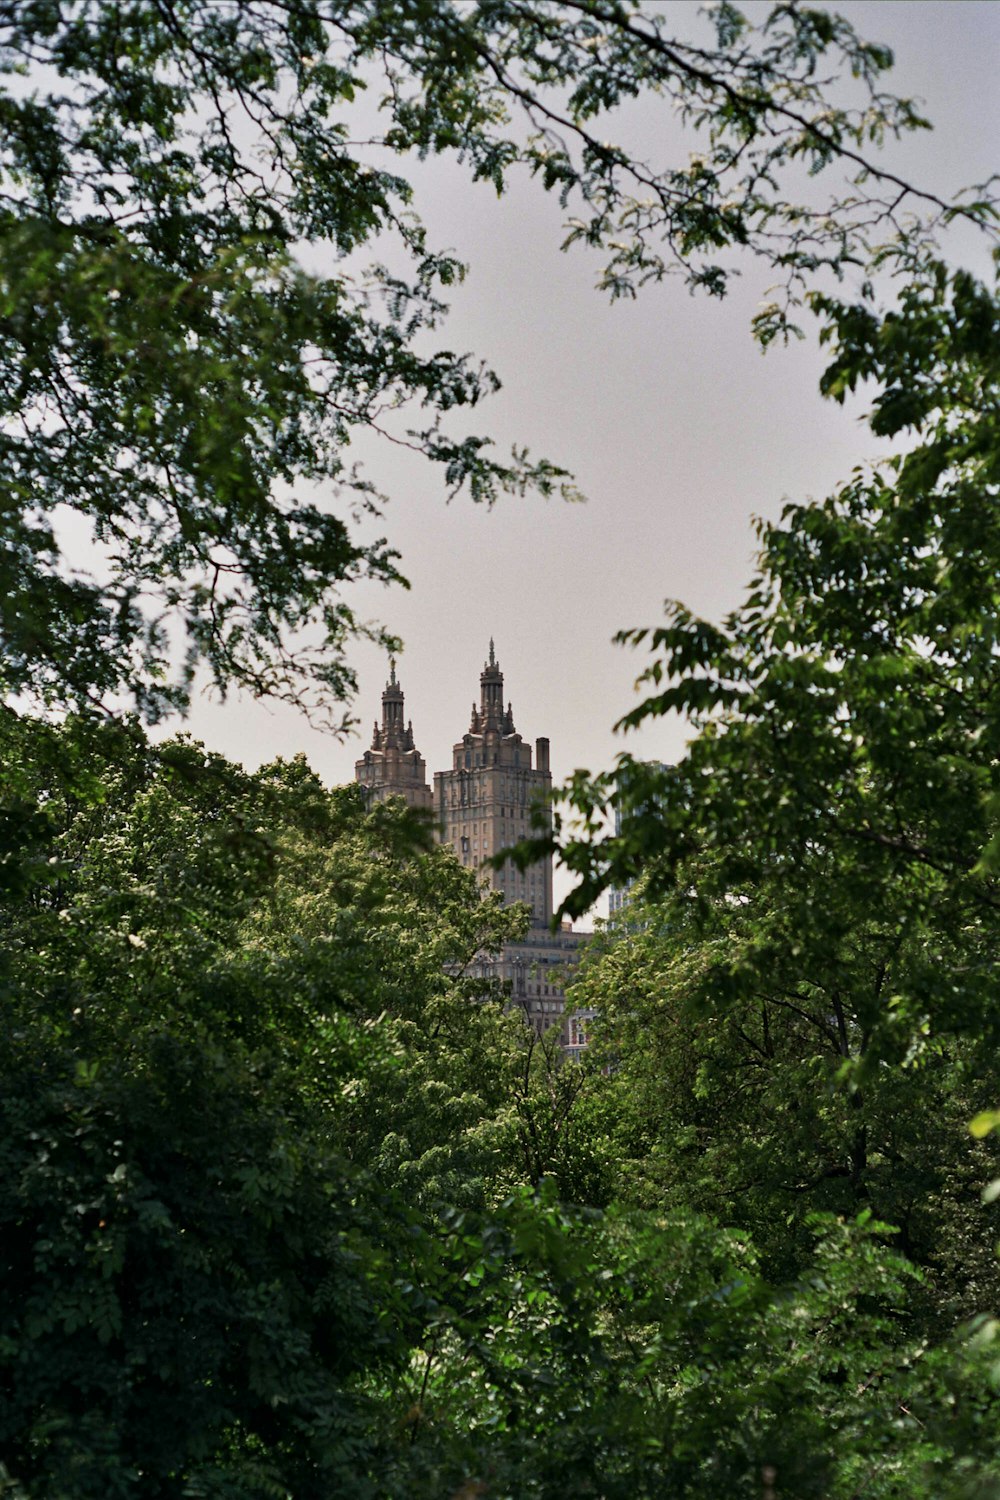 a view of a building through the trees